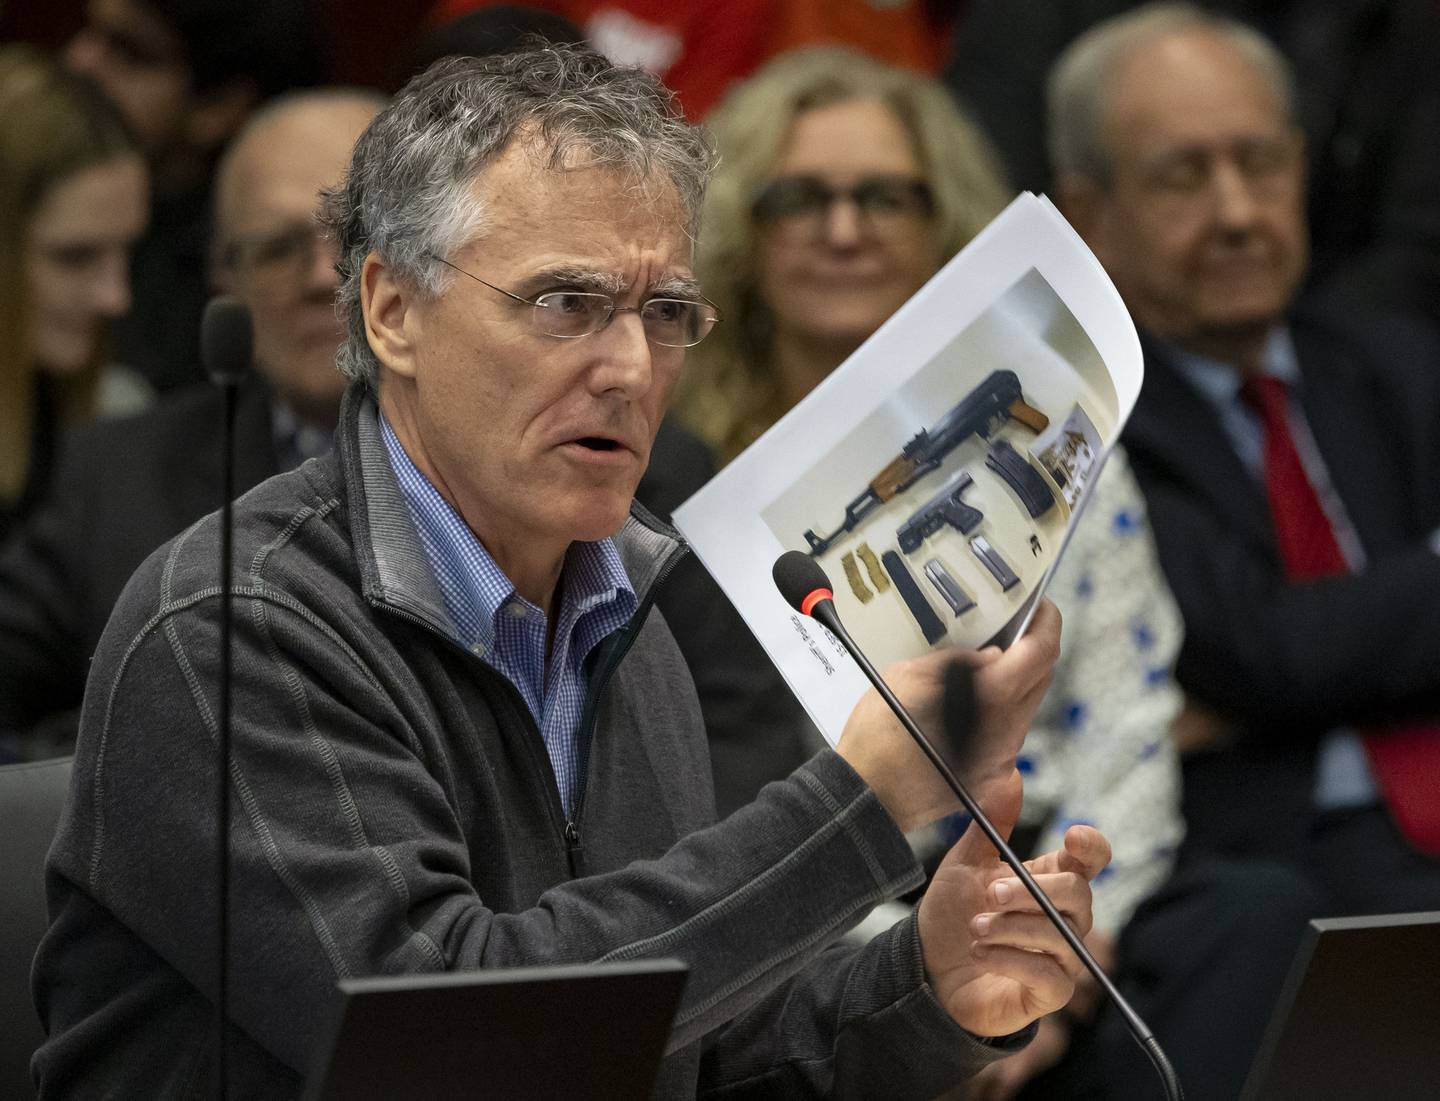 Cook County Sheriff Tom Dart holds photos of confiscated weapons while testifying, Dec. 20, 2022, during a hearing about gun legislation in front of an Illinois House committee in Chicago.